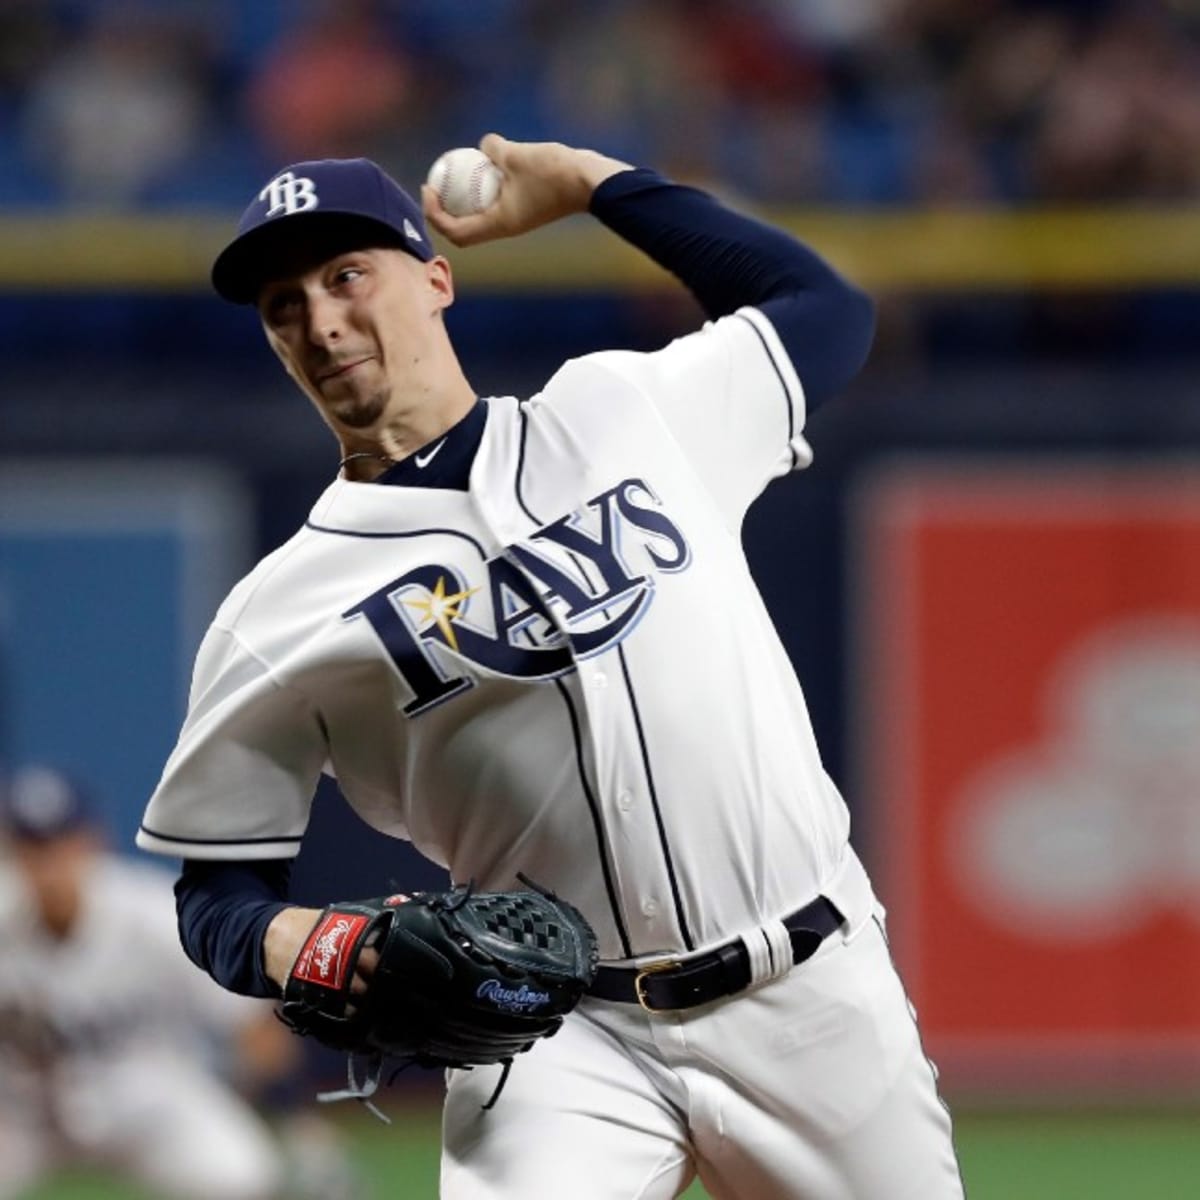 Blake Snell (@snellzilla4) • Instagram photos and videos